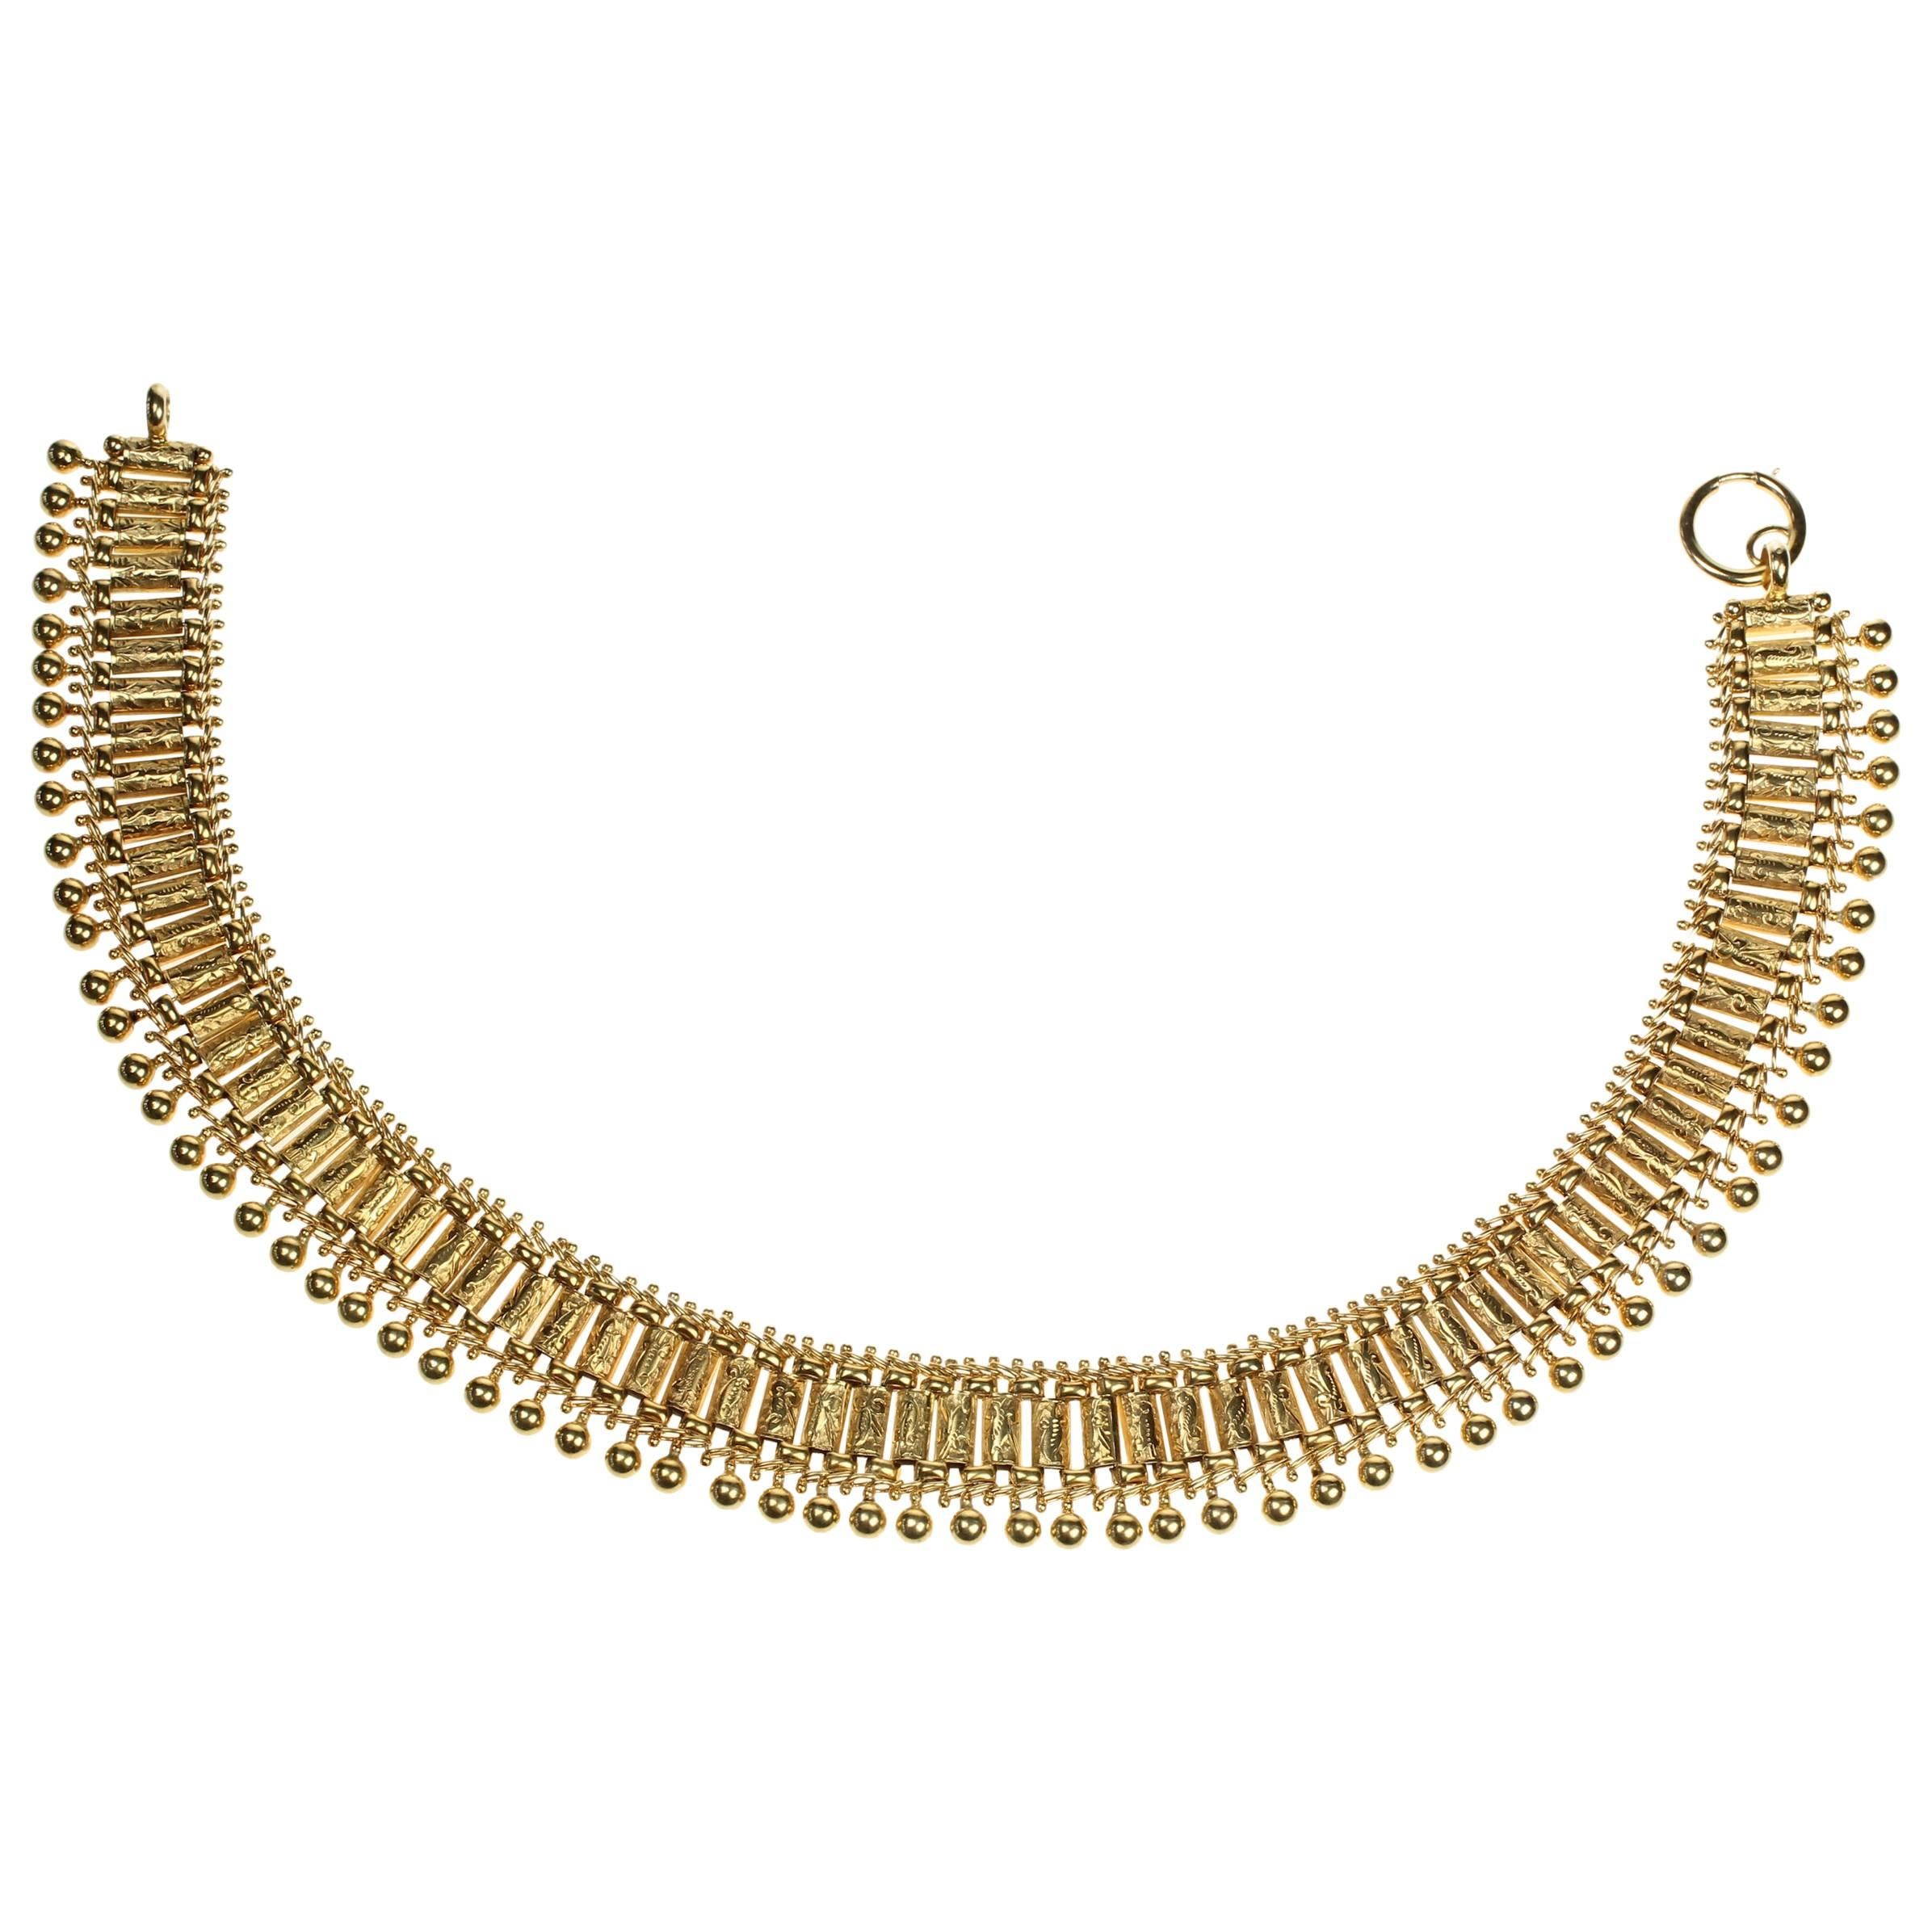 Silver Gilt Etruscan Style Collar Choker Necklace For Sale